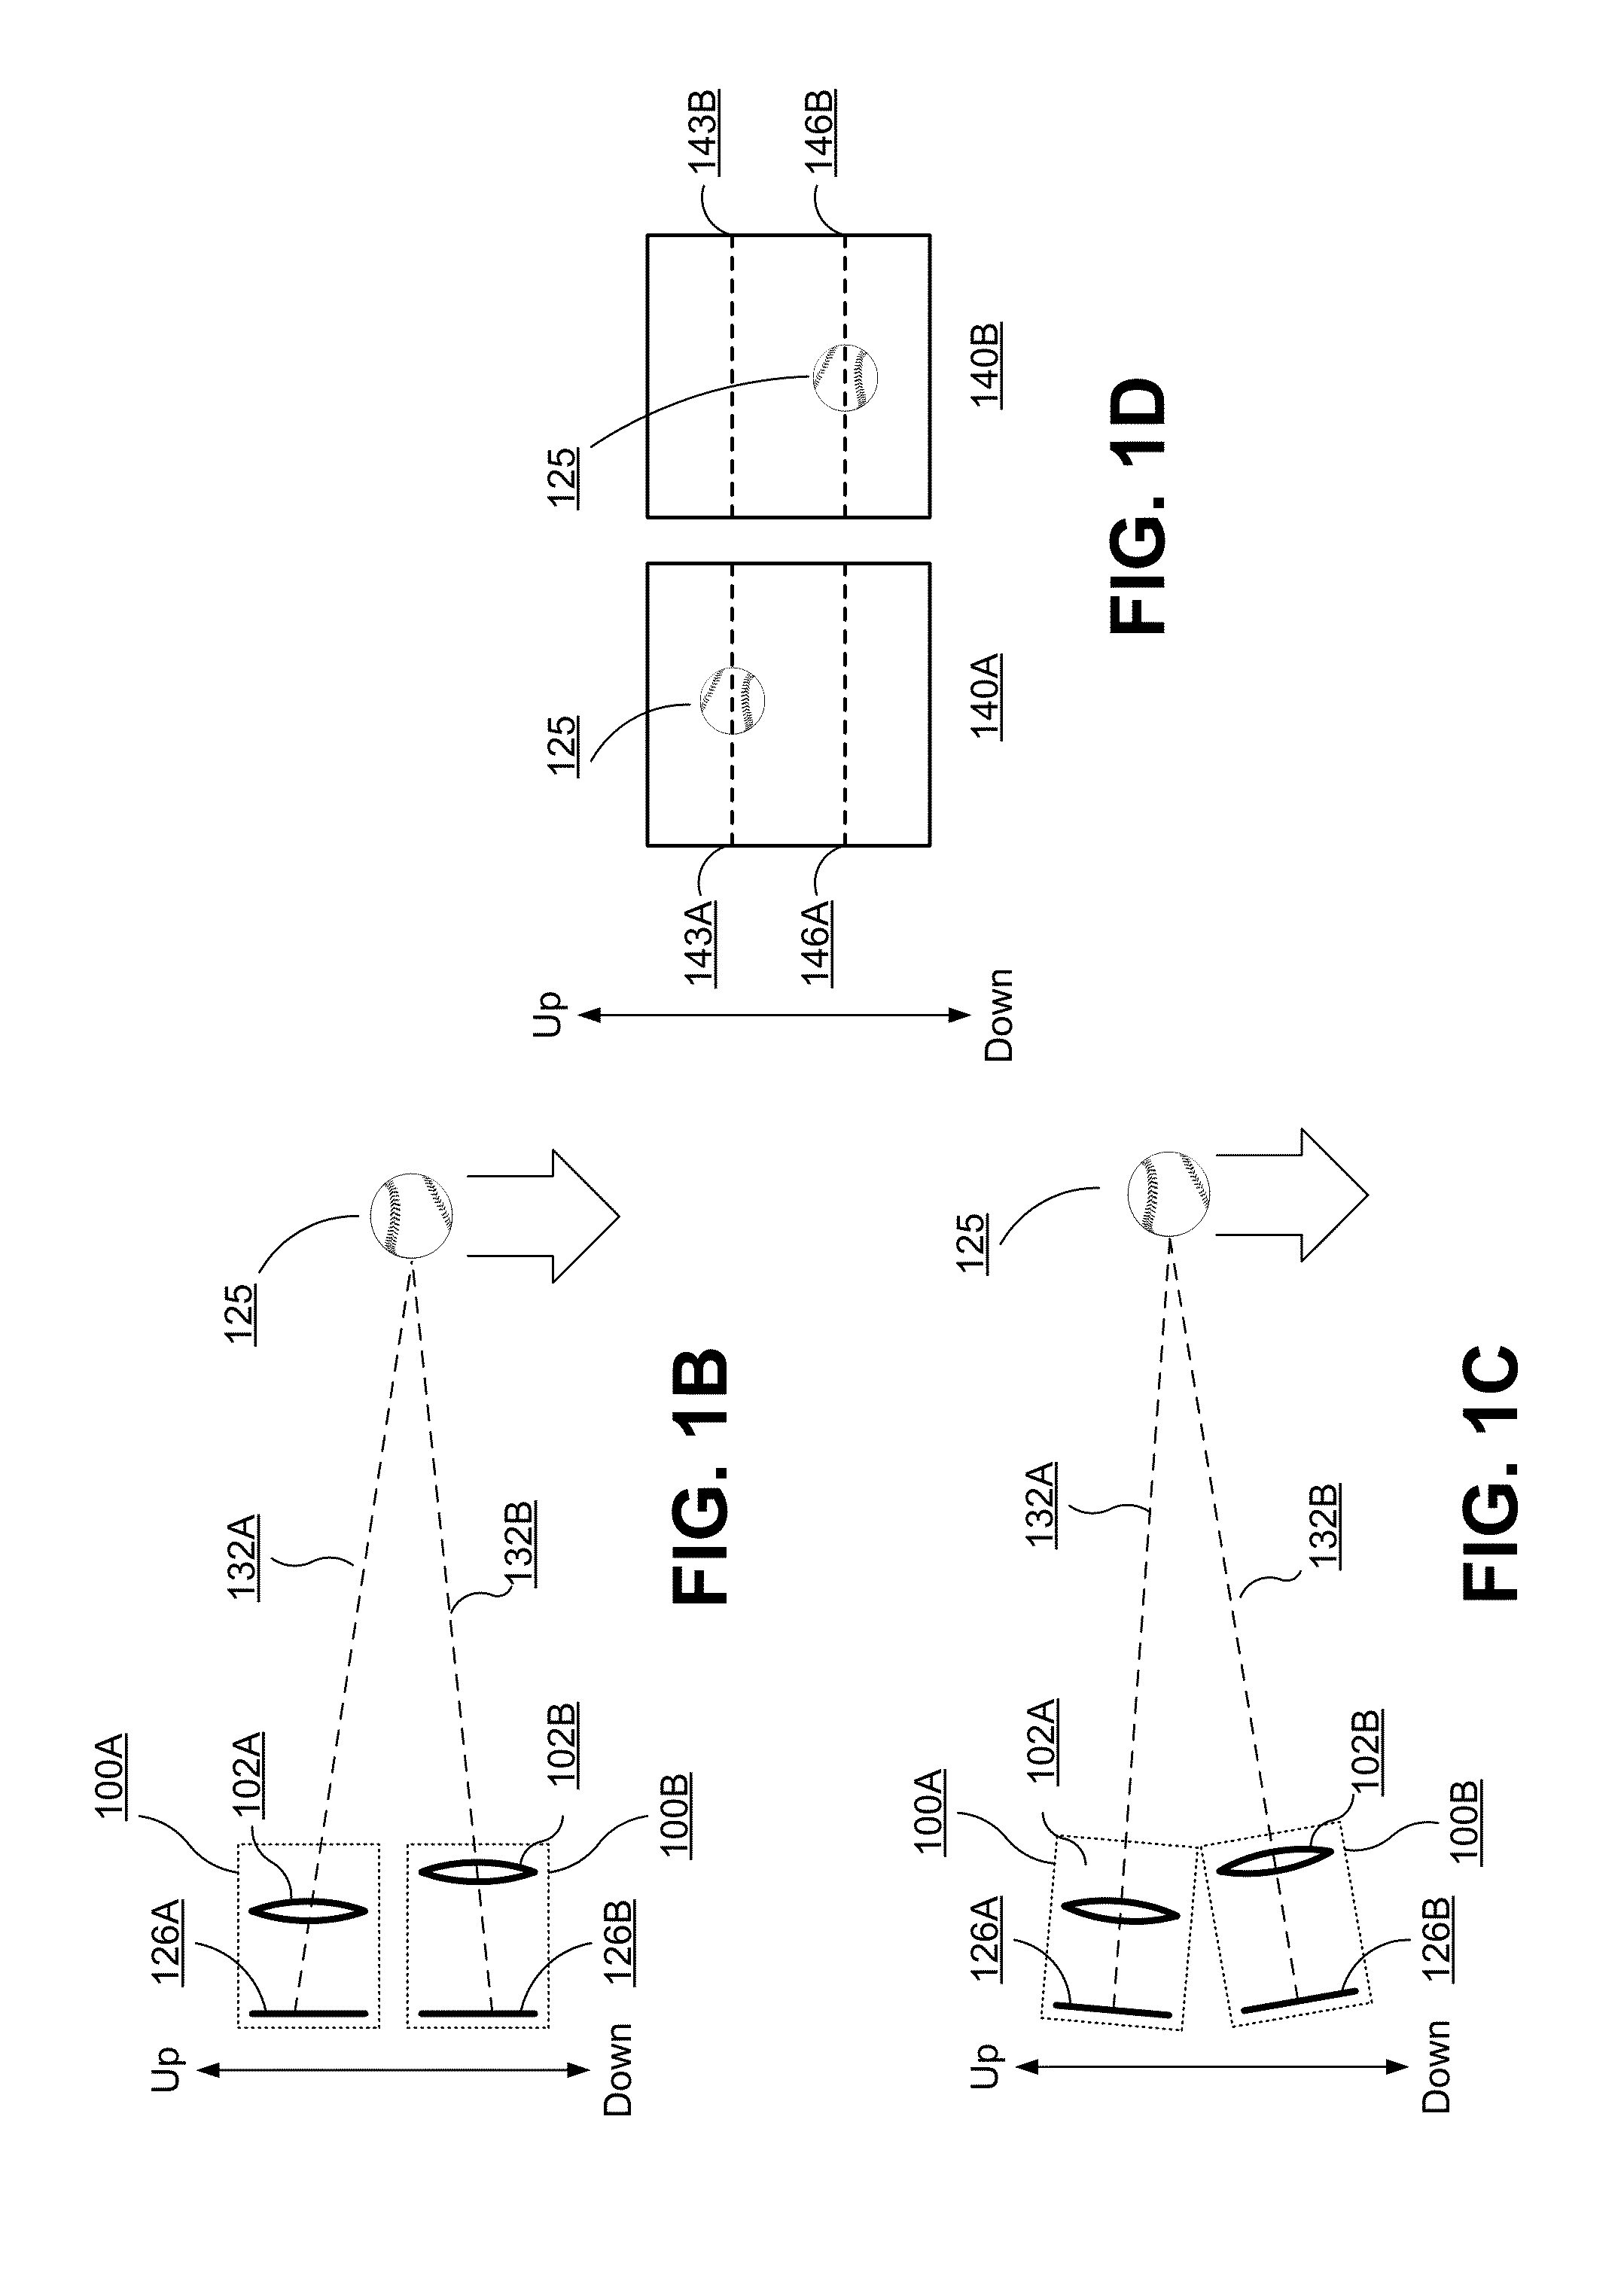 Target-Less Auto-Alignment Of Image Sensors In A Multi-Camera System